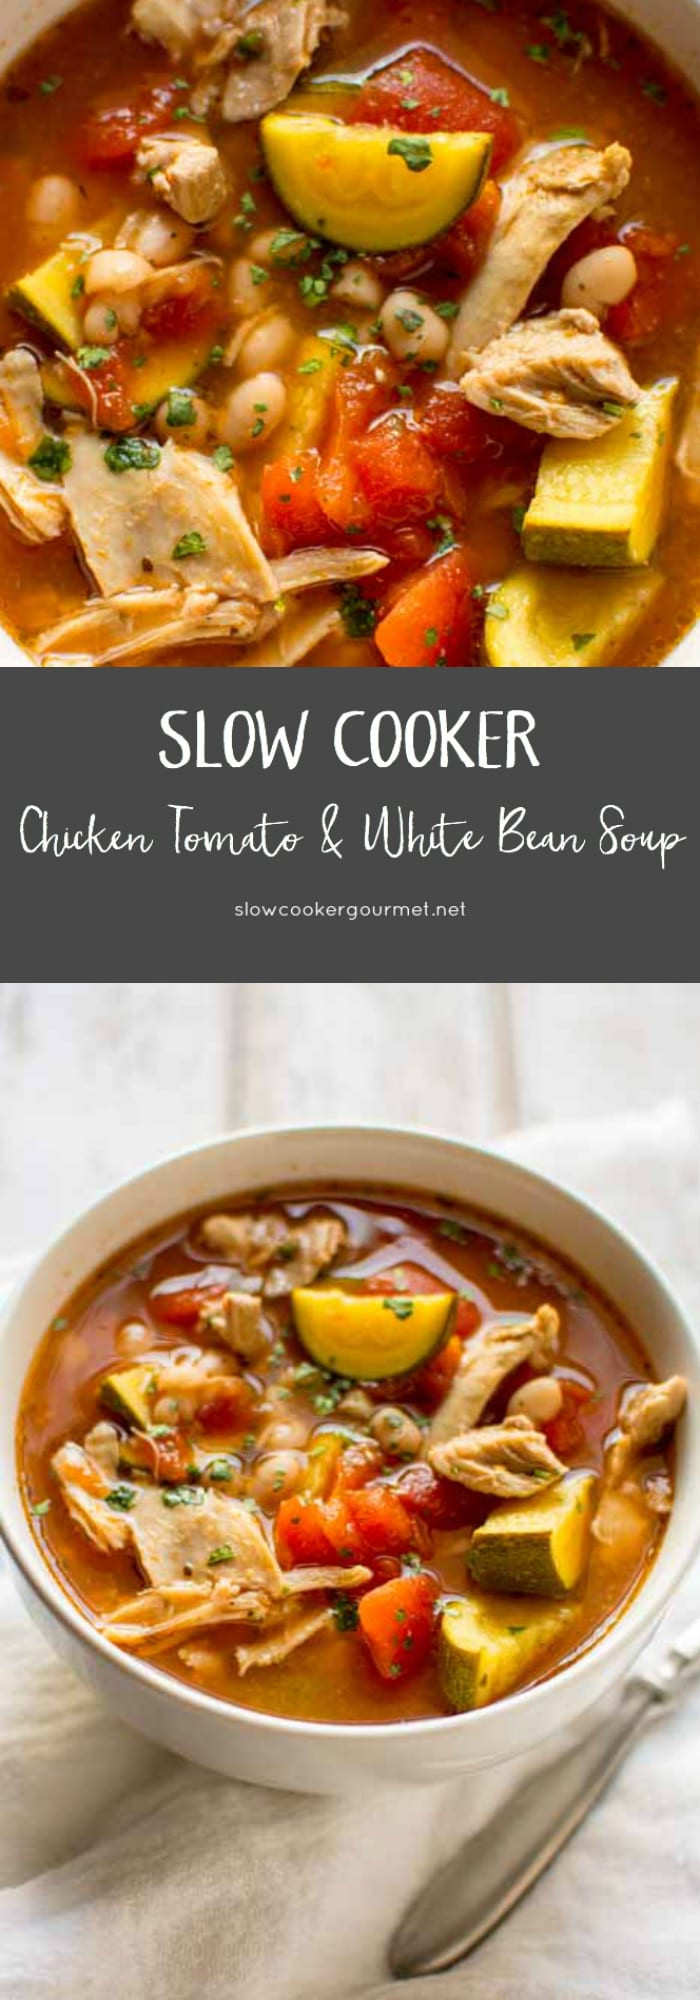 Chicken And White Bean Soup
 Slow Cooker Chicken Tomato and White Bean Soup Slow